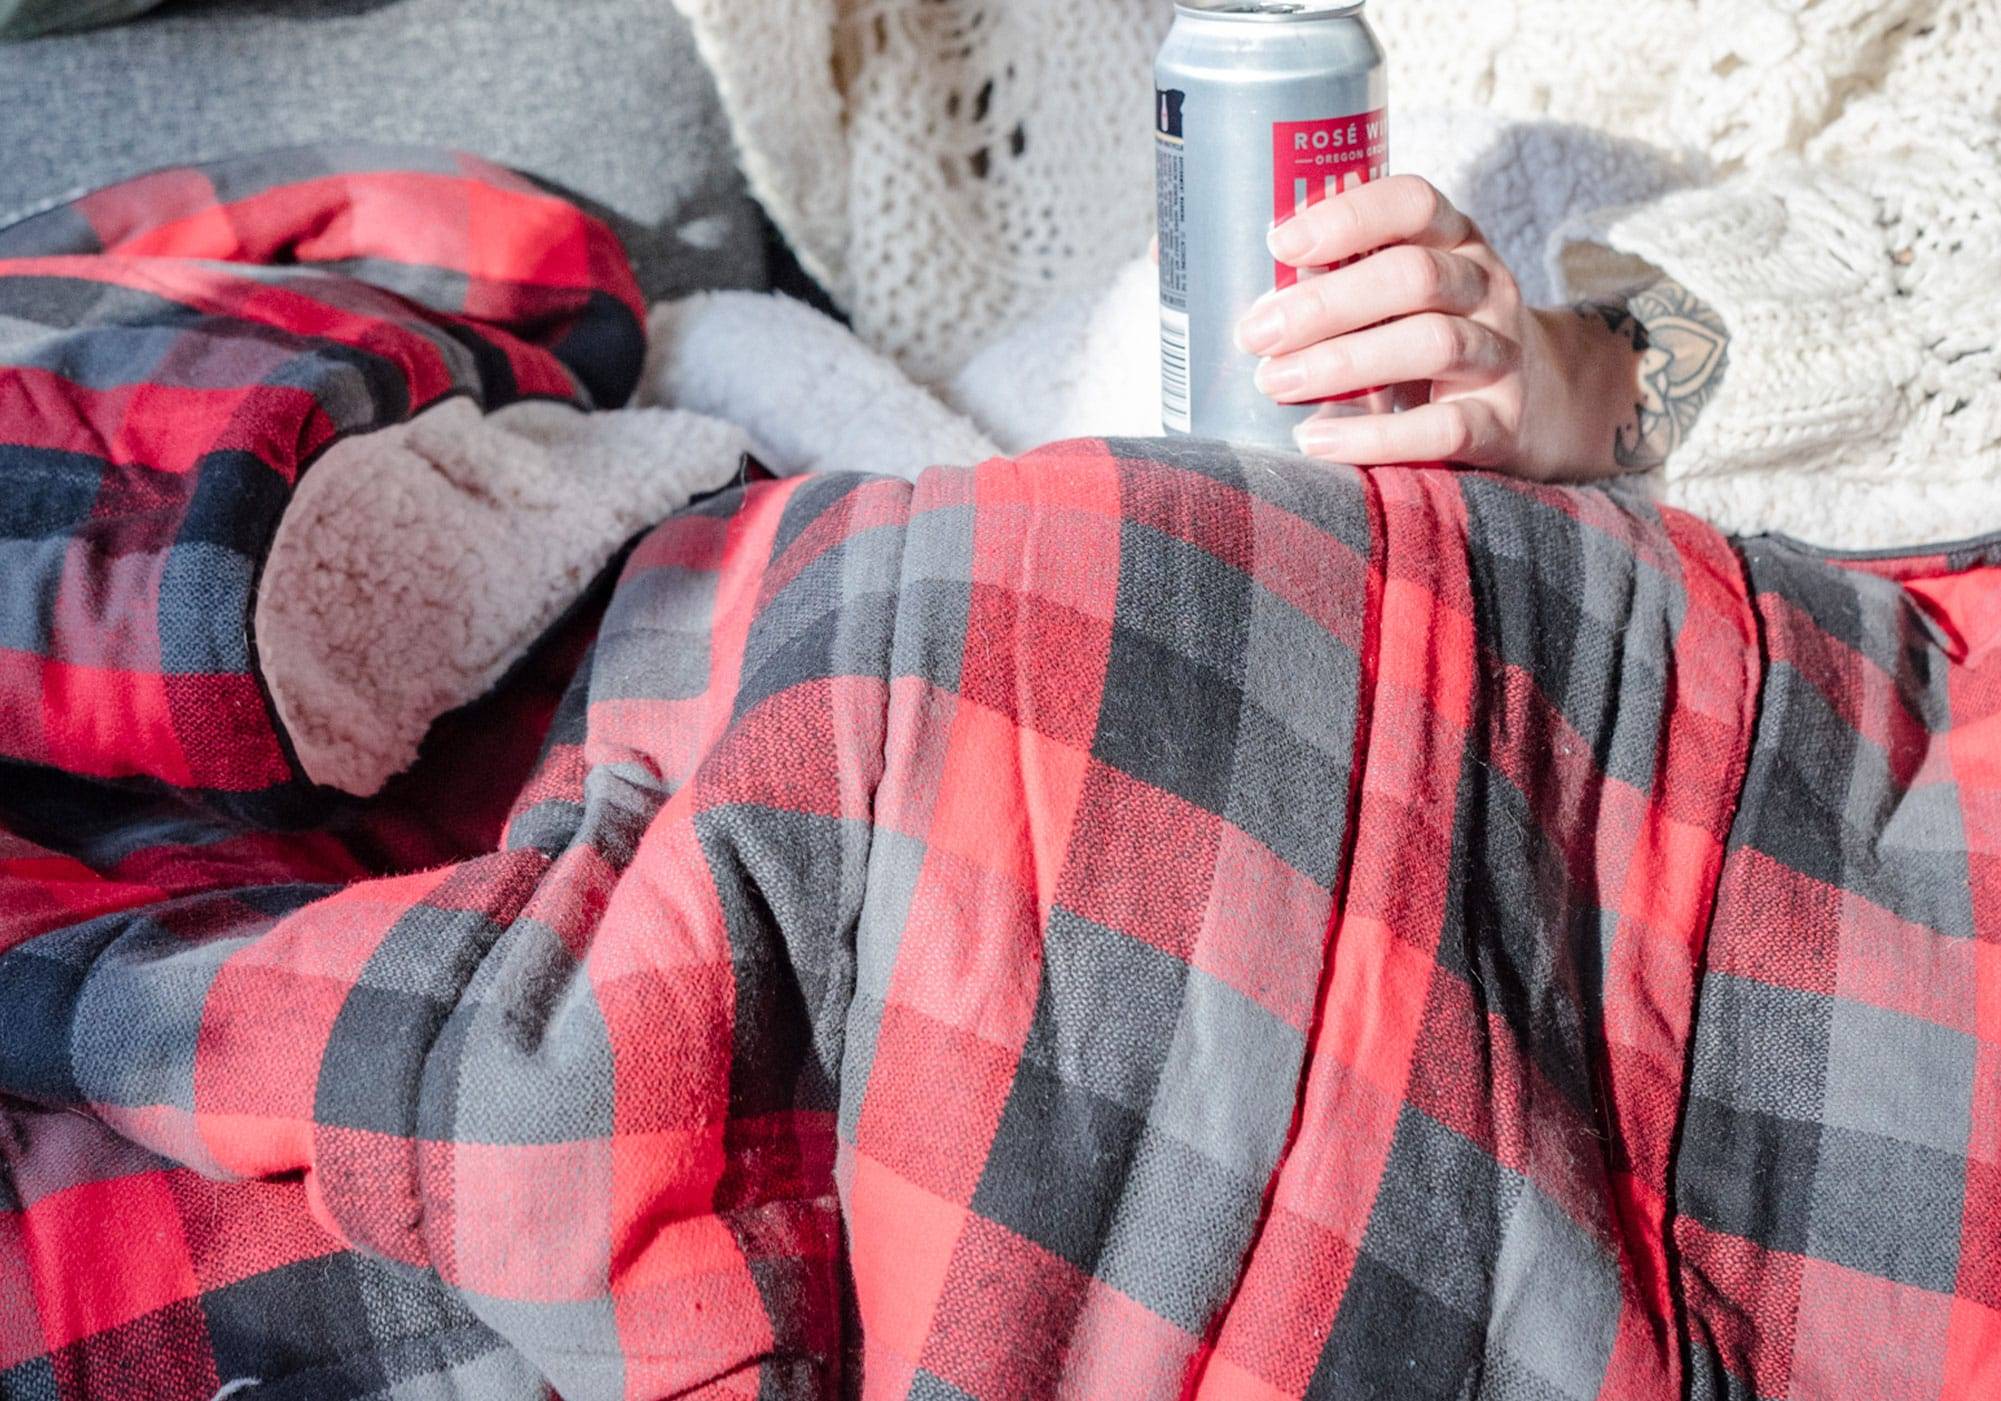 Woman holding canned wine under a flannel sherpa blanket